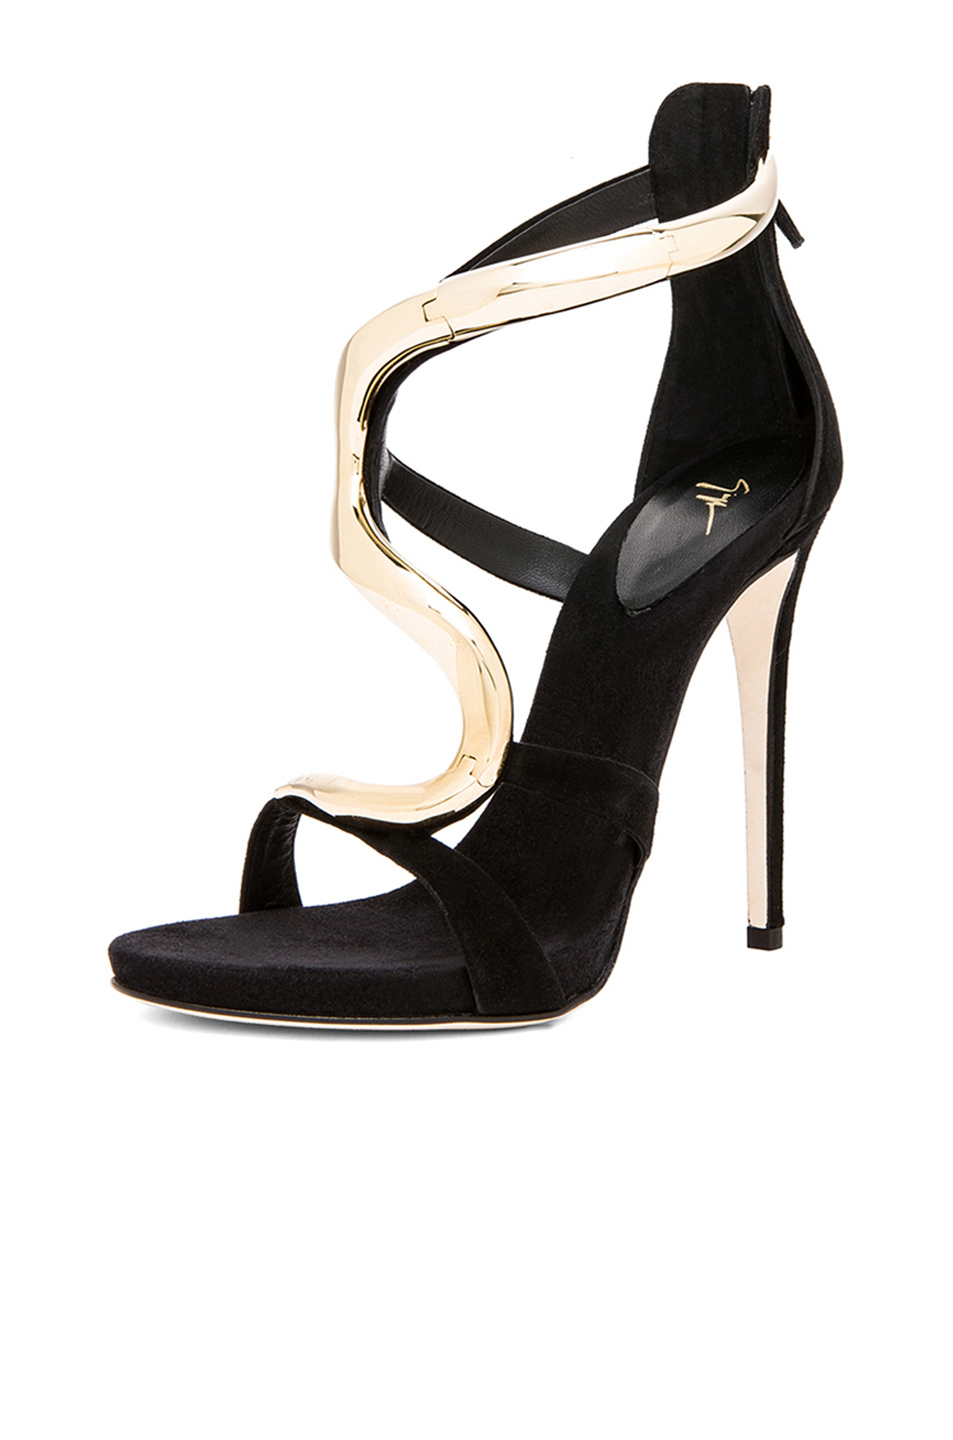 Stylish Black Suede Kitten Heels with Gold Buckle